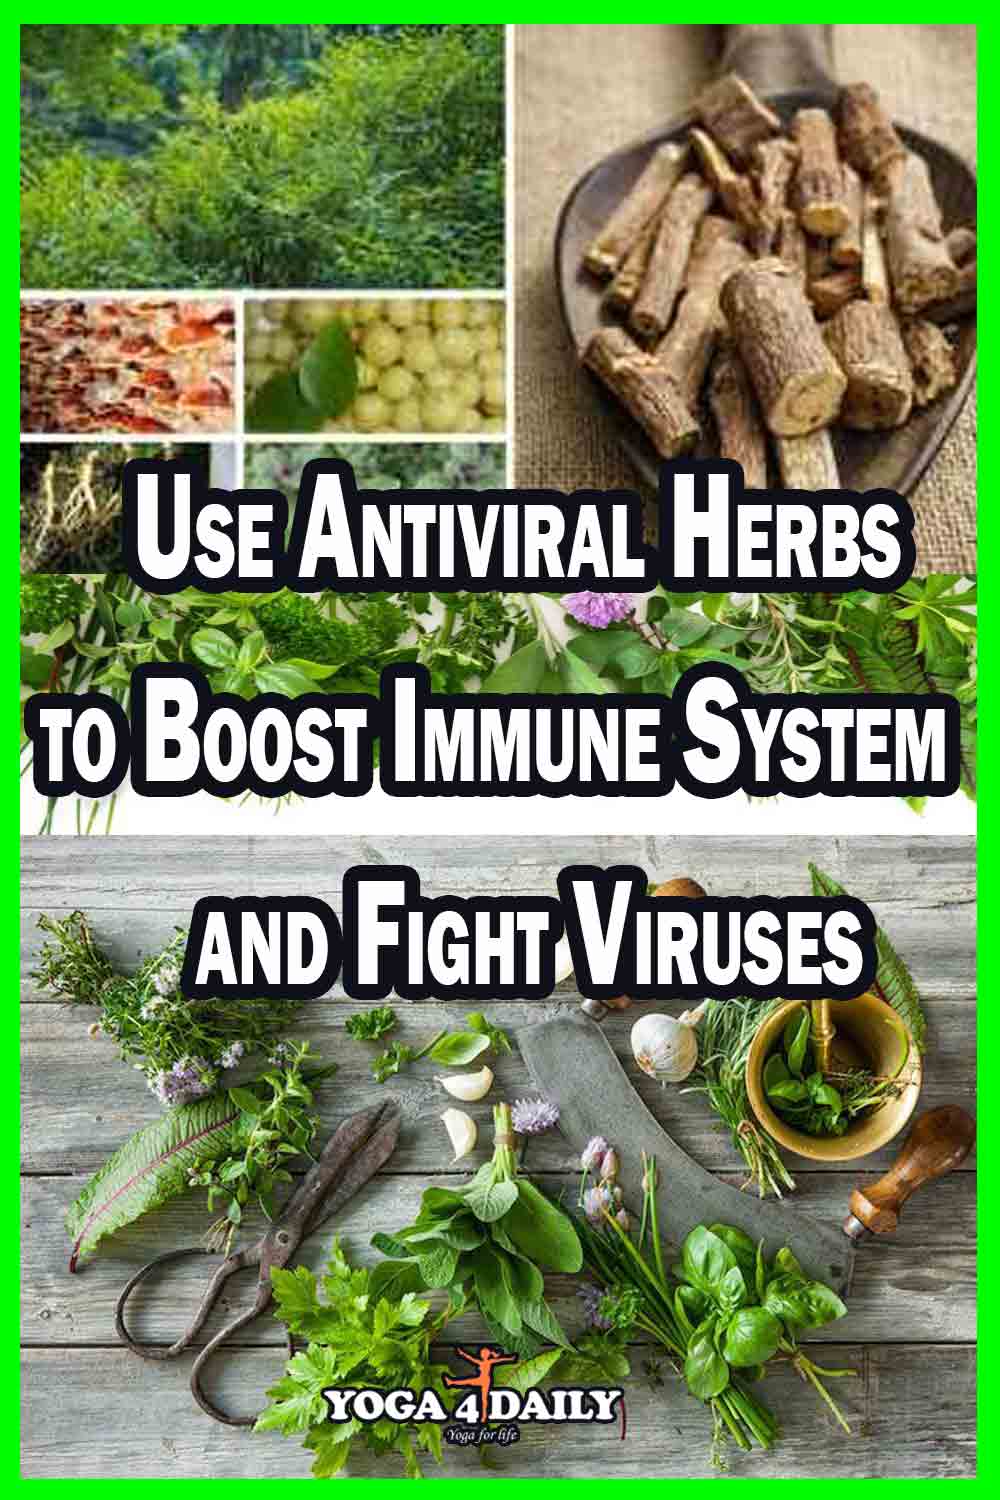 Use Antiviral Herbs to Boost Immune System and Fight Viruses